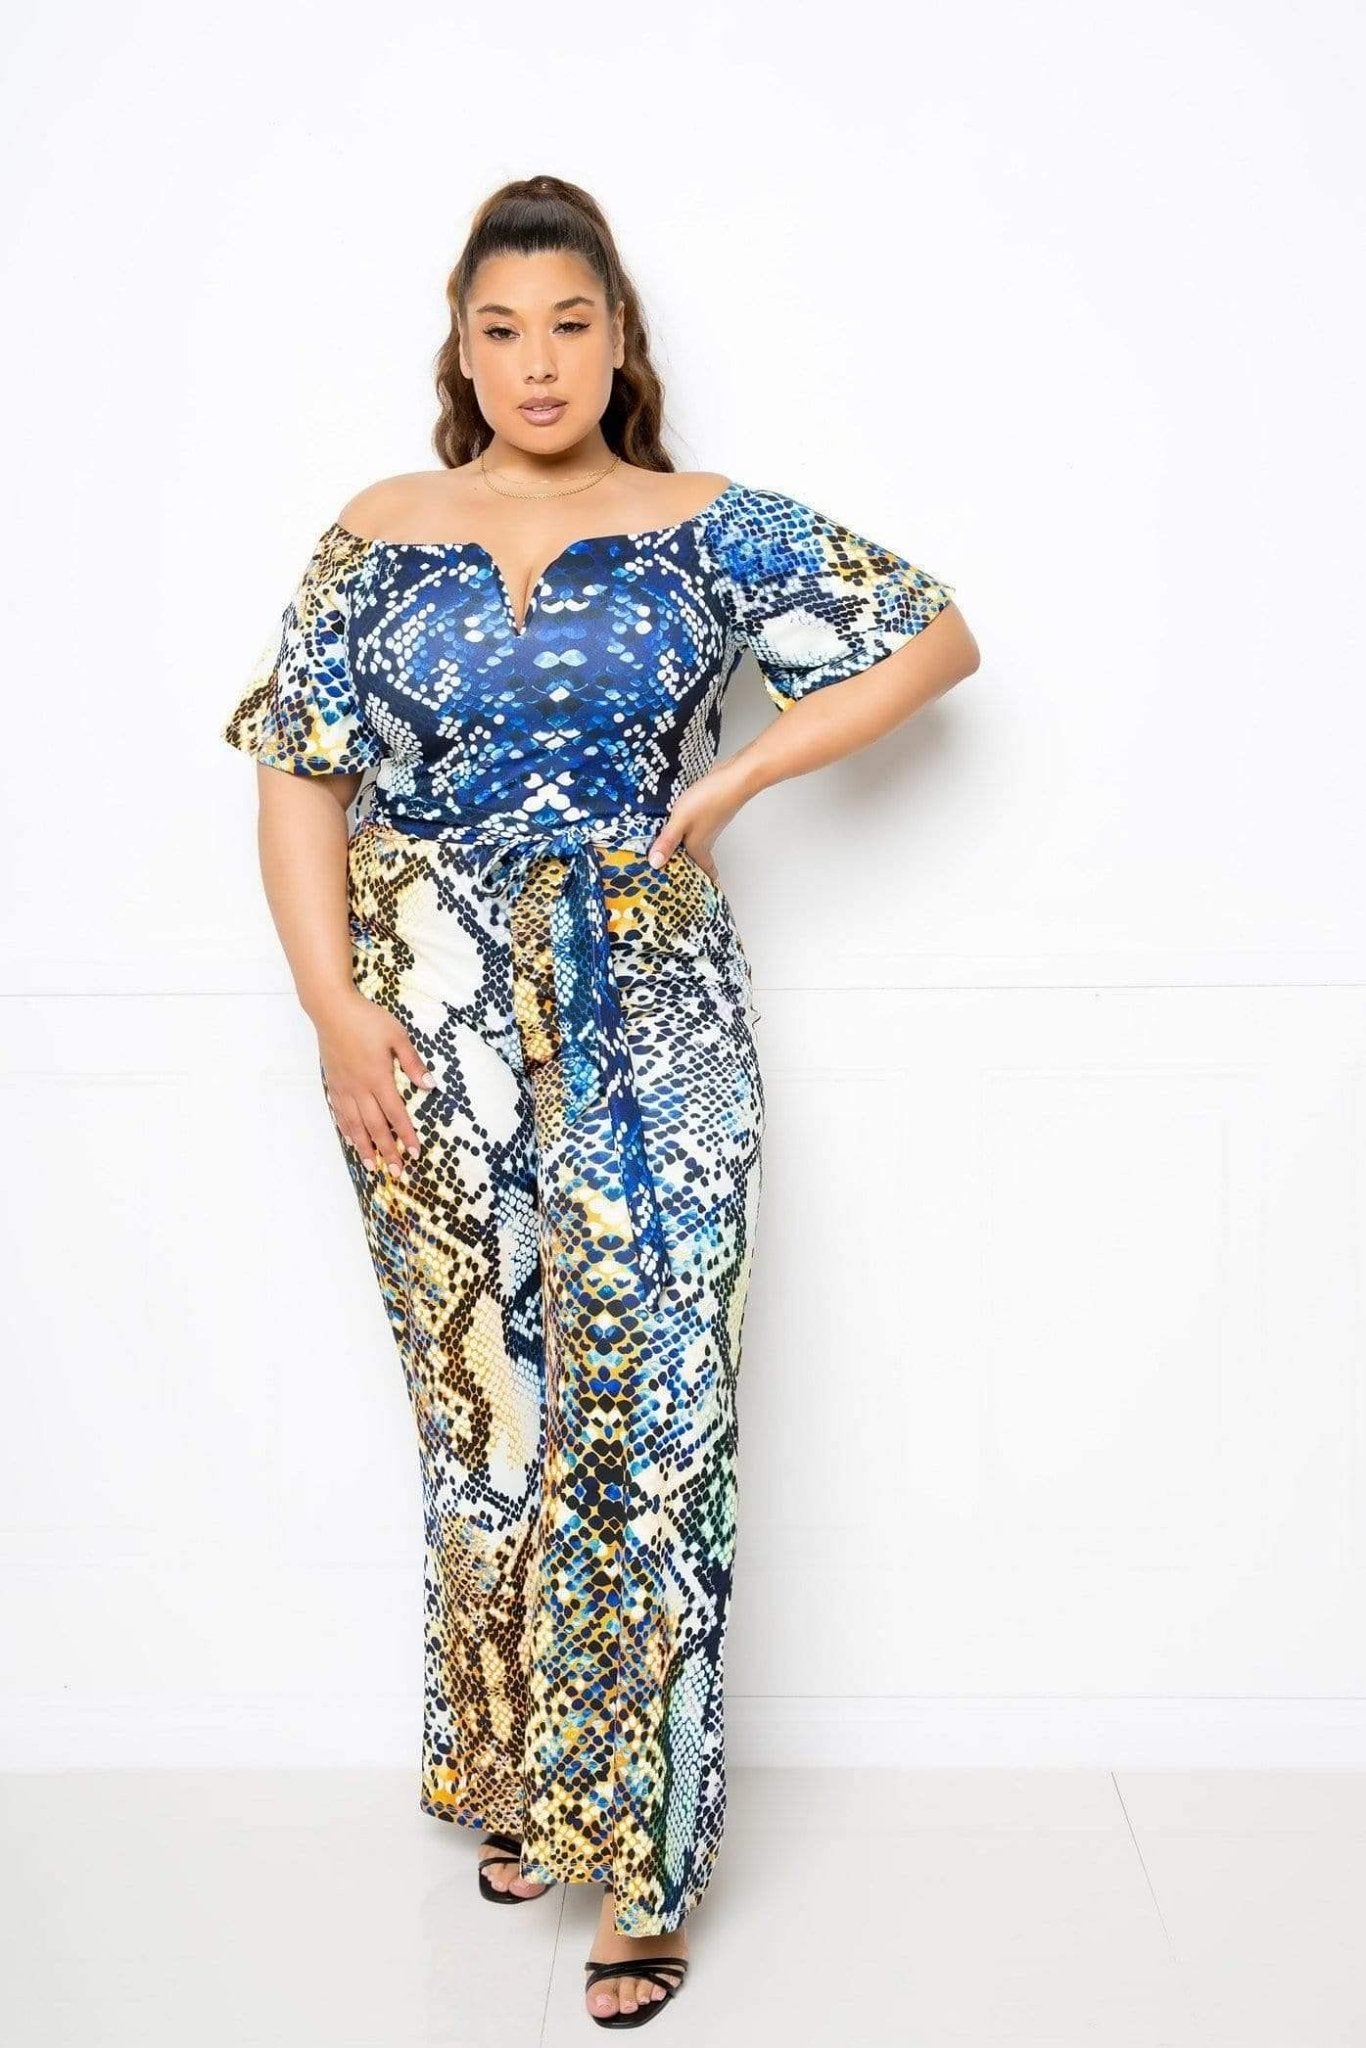 Short Sleeve Jumpsuit Plus Size - Shopping Therapy, LLC Dress